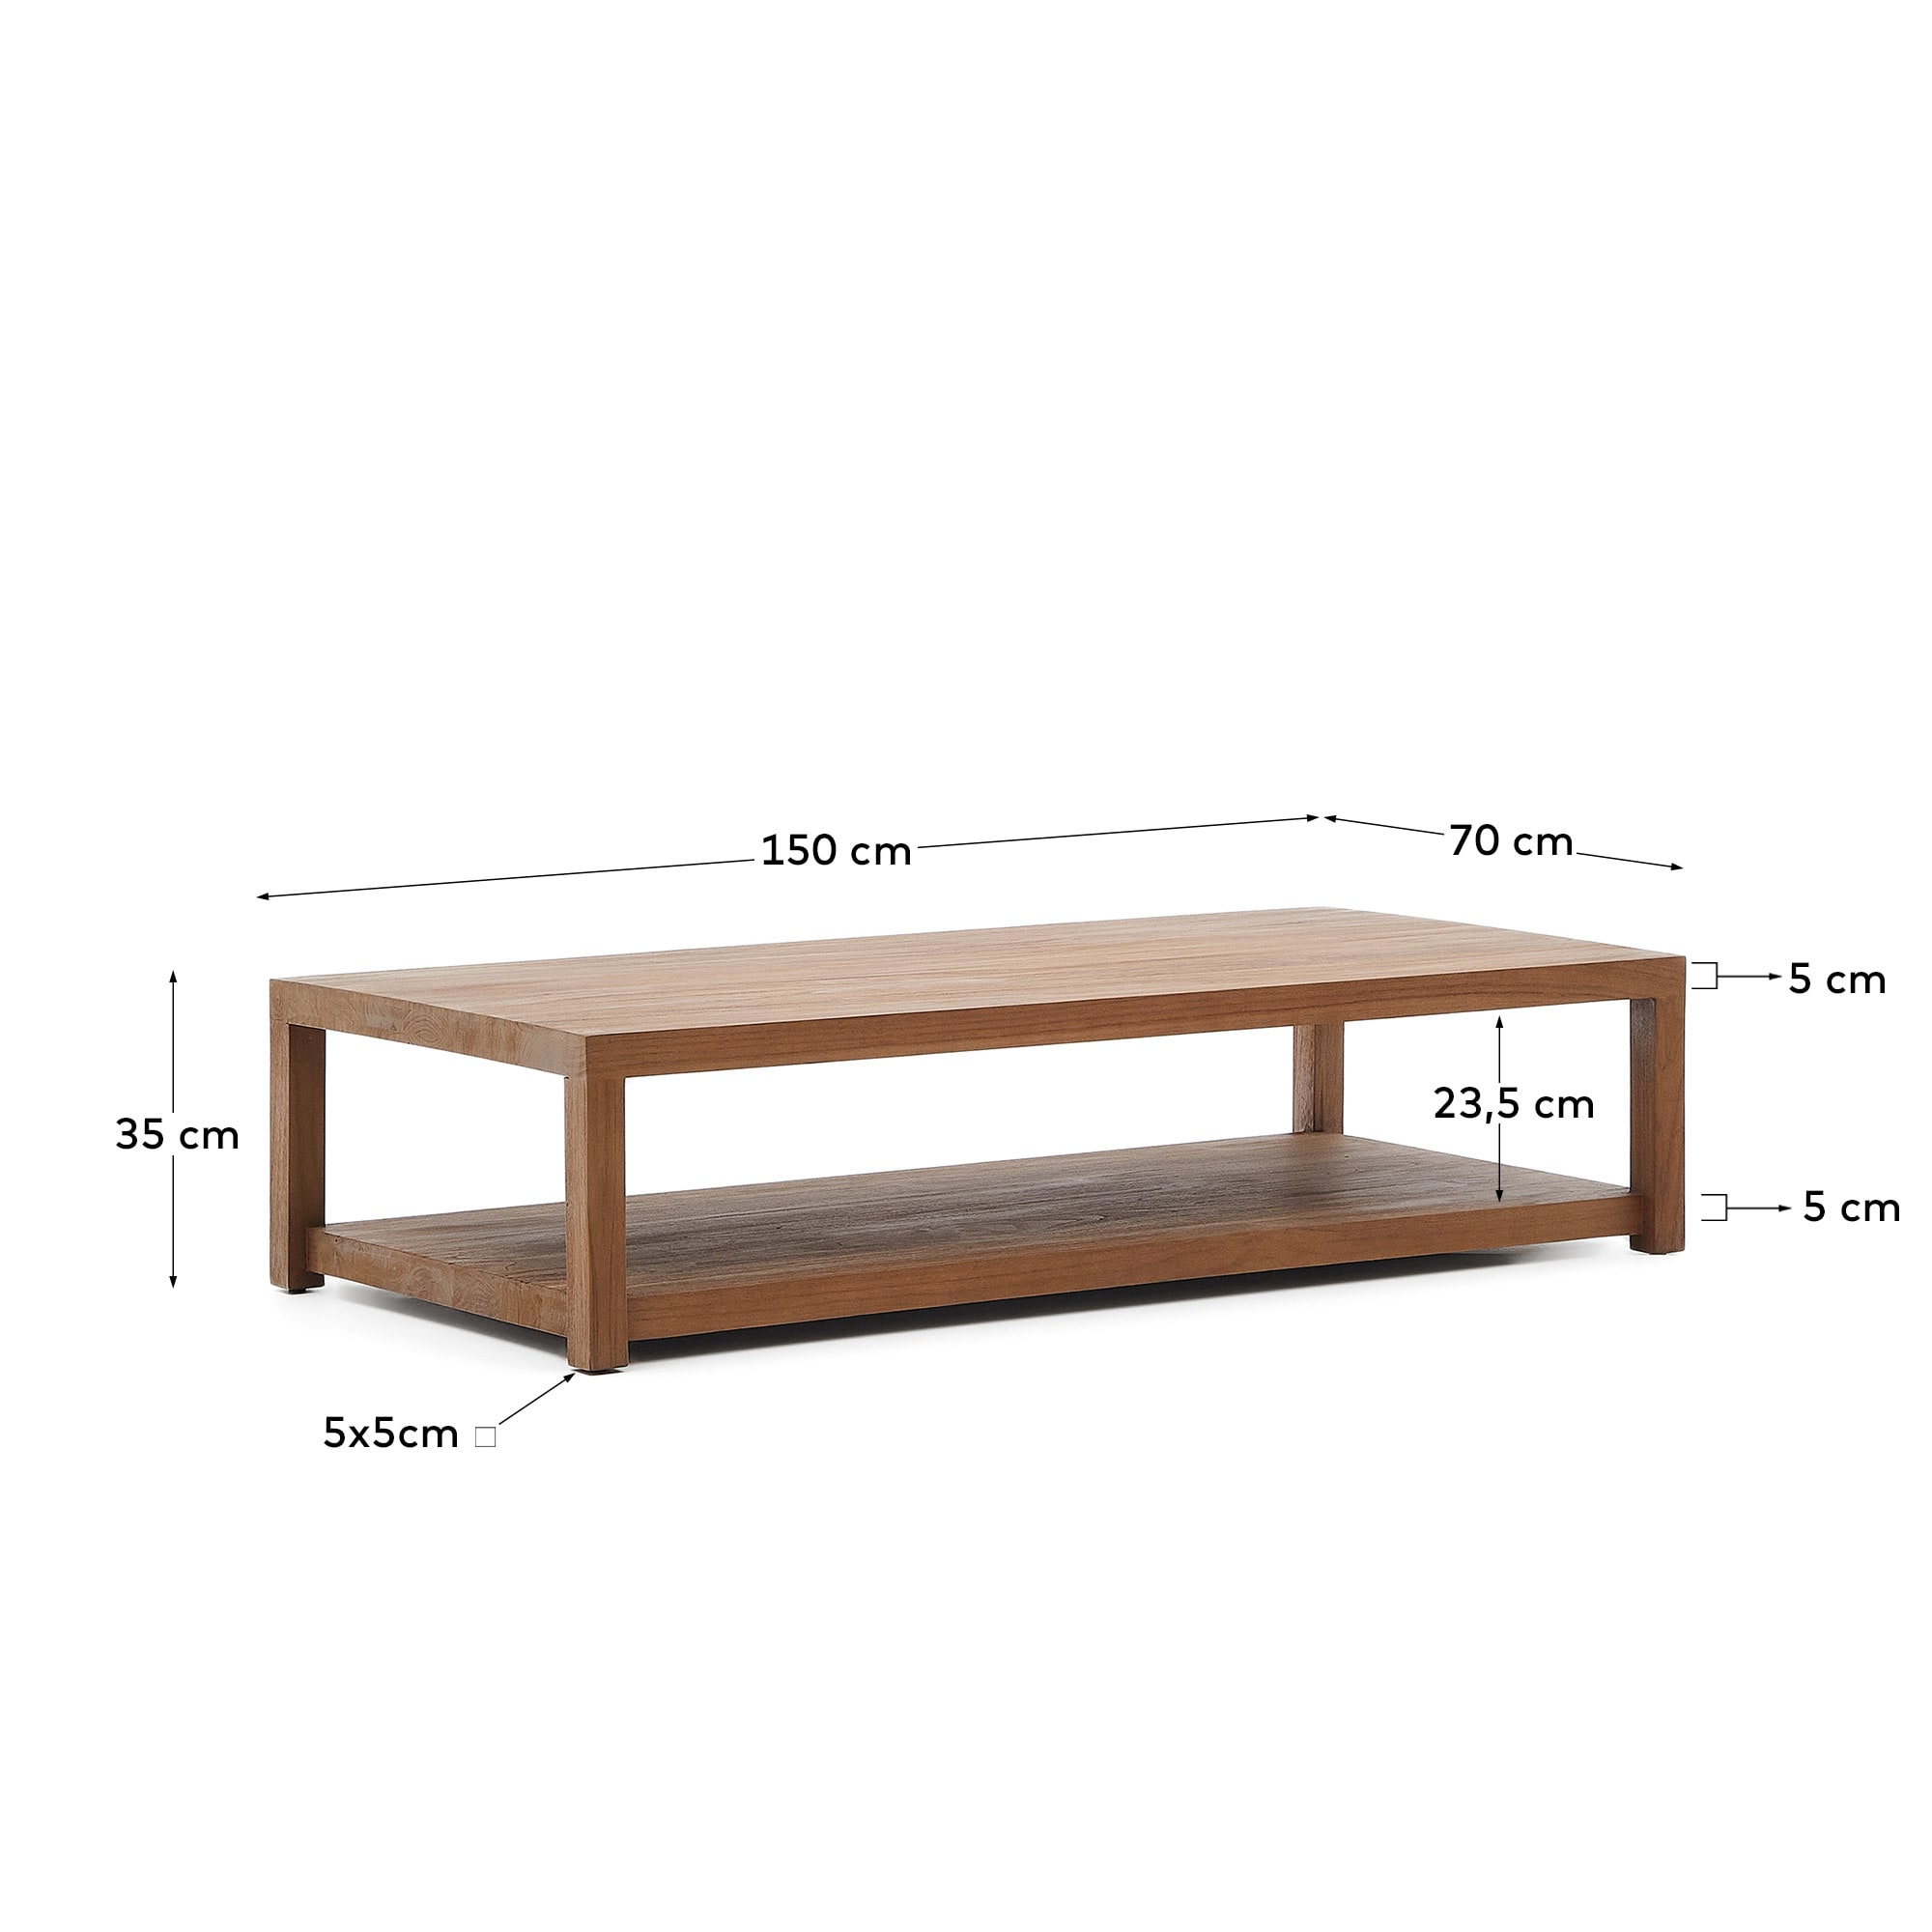 Sashi coffee table made in solid teak wood 150 x 70 cm - sizes